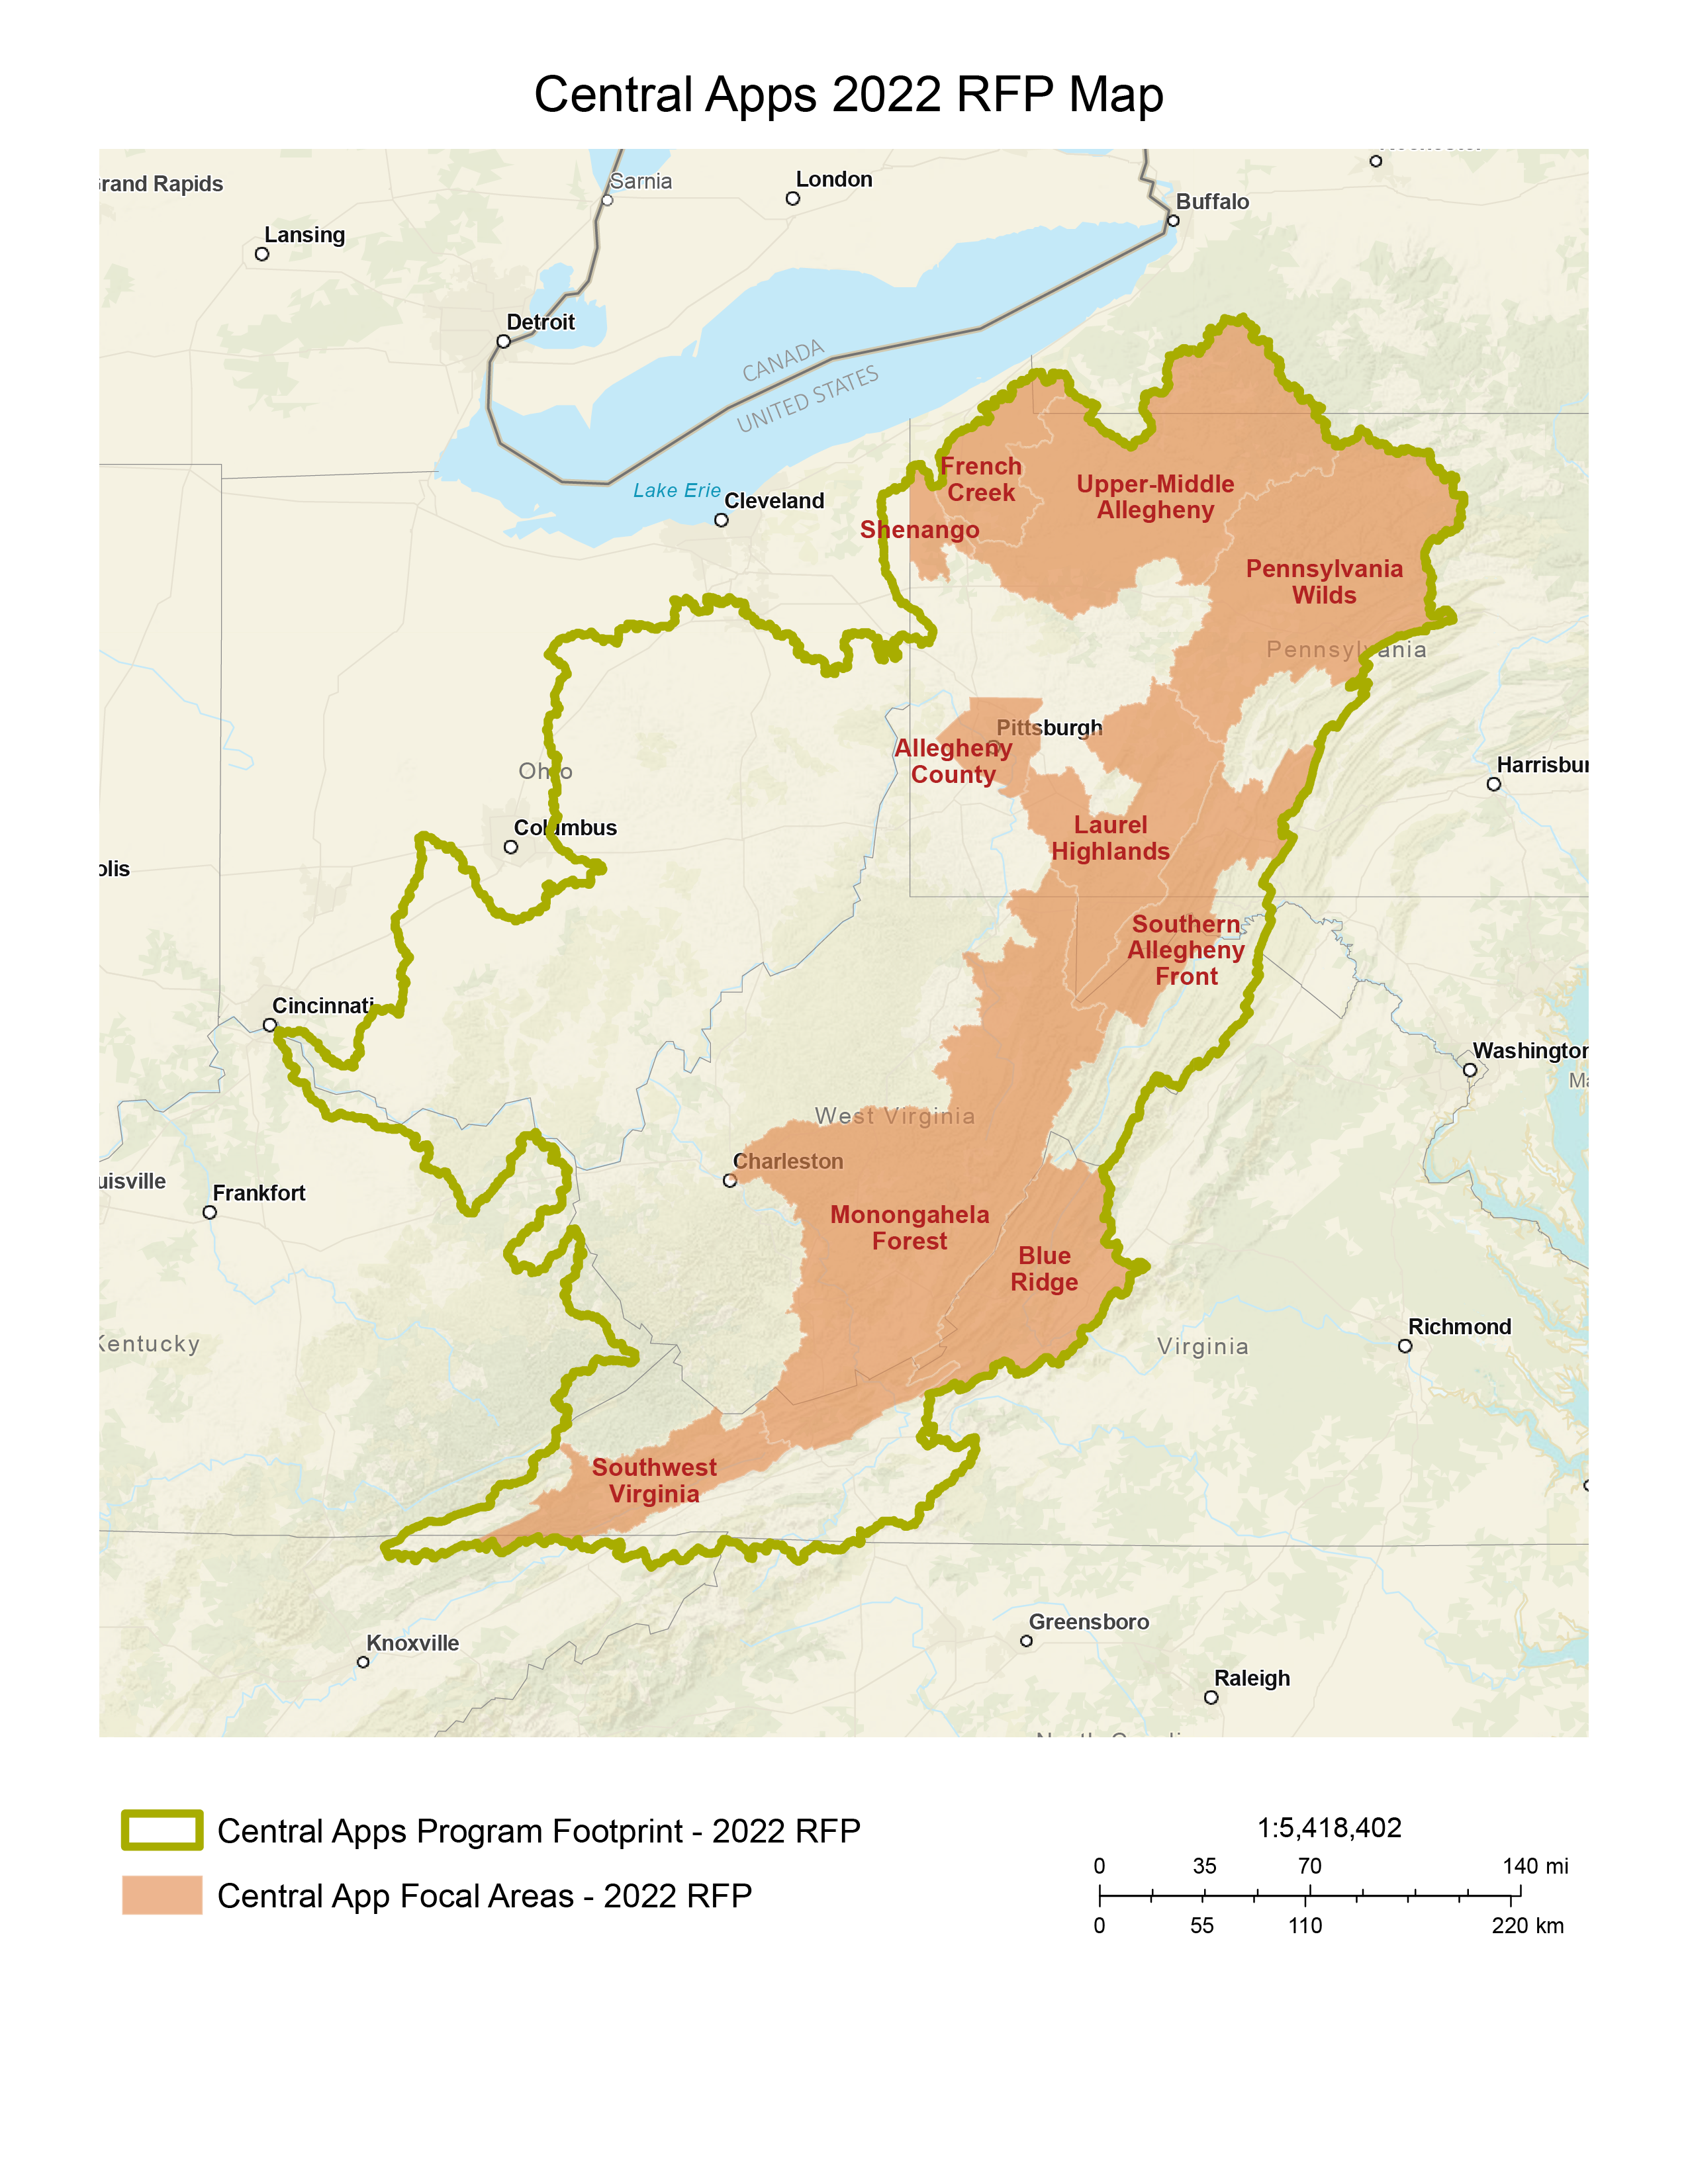 Map of the areas included within the Central Appalachia 2022 RFP, with focal areas highlighted in orange. Please email John.Wright@nfwf.org for any questions about what areas are included.